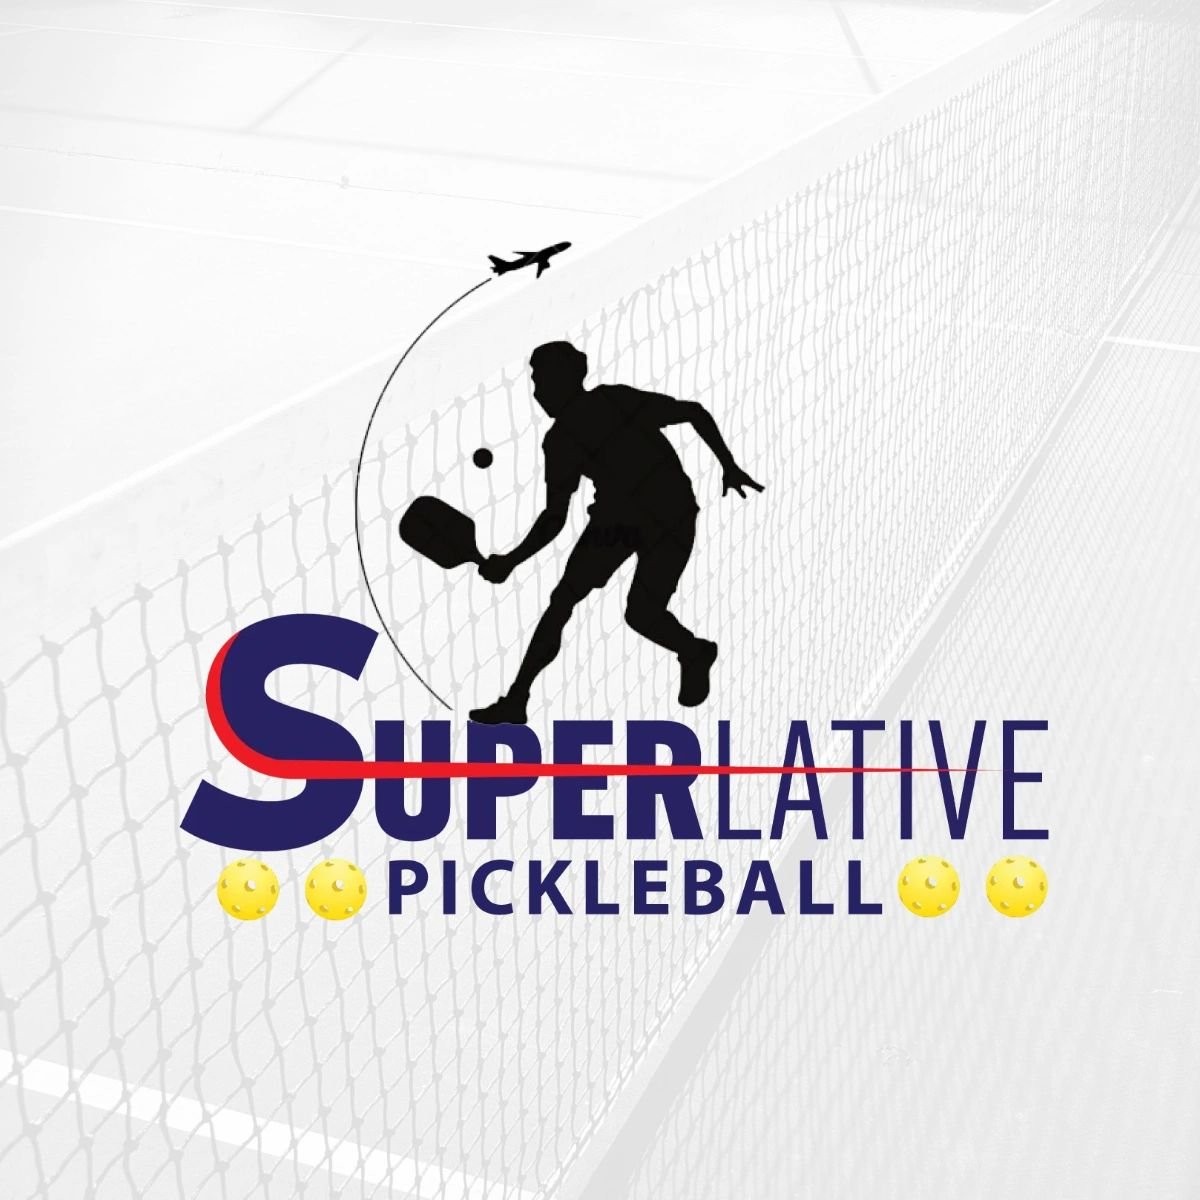 Superlative Pickleball is the one-stop solution for your pickleball travel needs. Join our free travel club today!